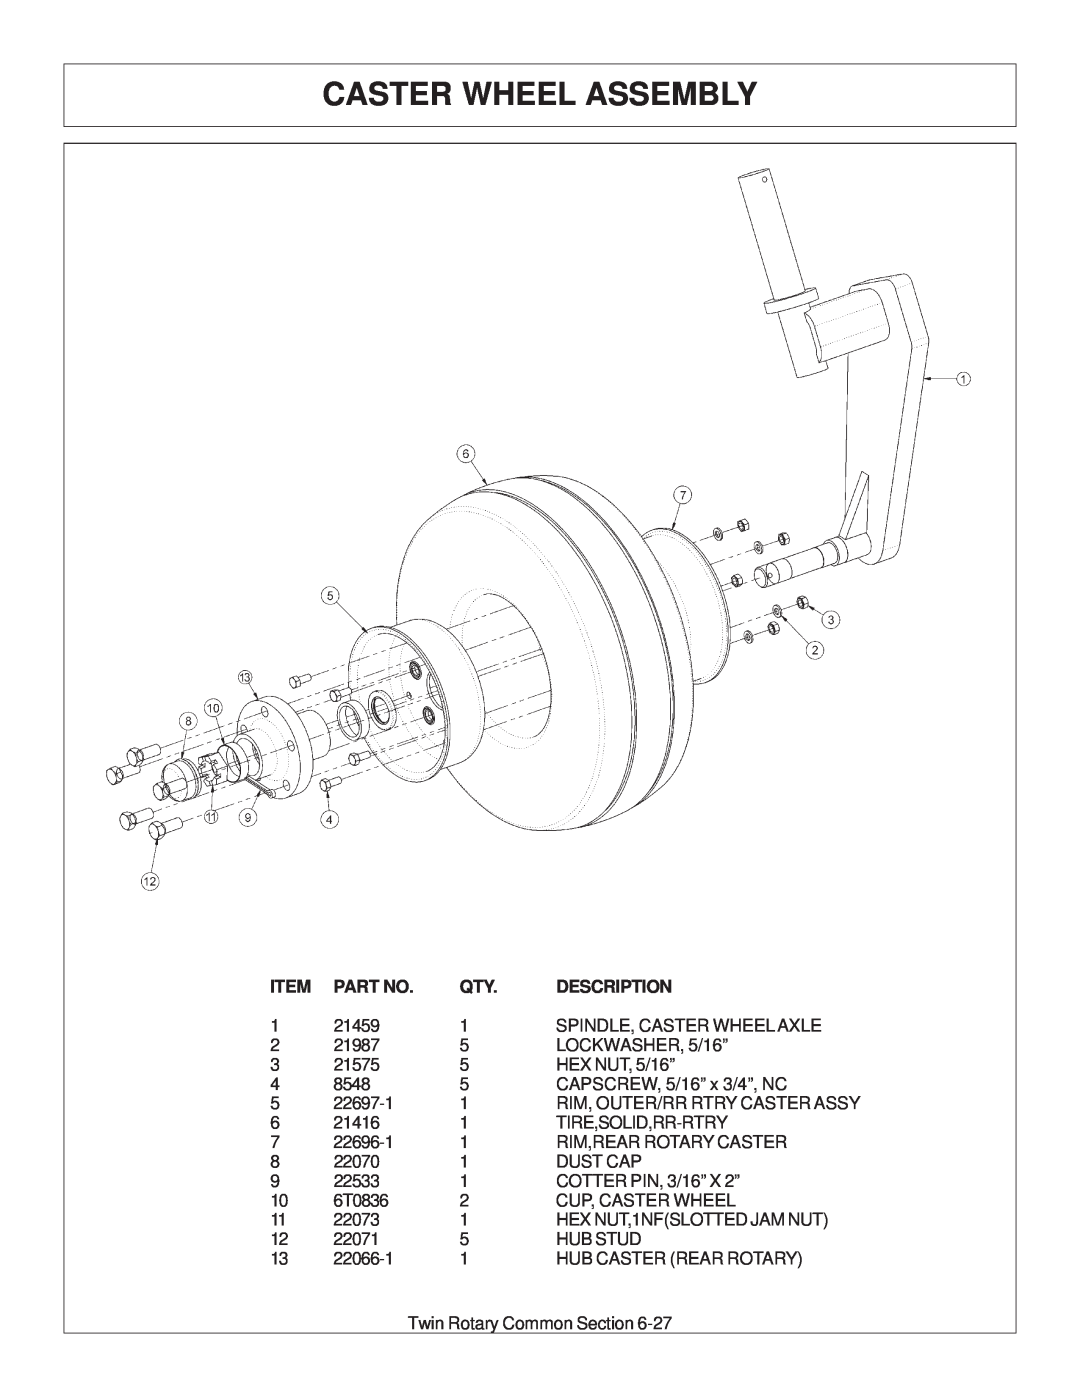 Tiger Products Co., Ltd JD 72-7520 manual Caster Wheel Assembly, Rim, Outer/Rr Rtry Caster Assy 